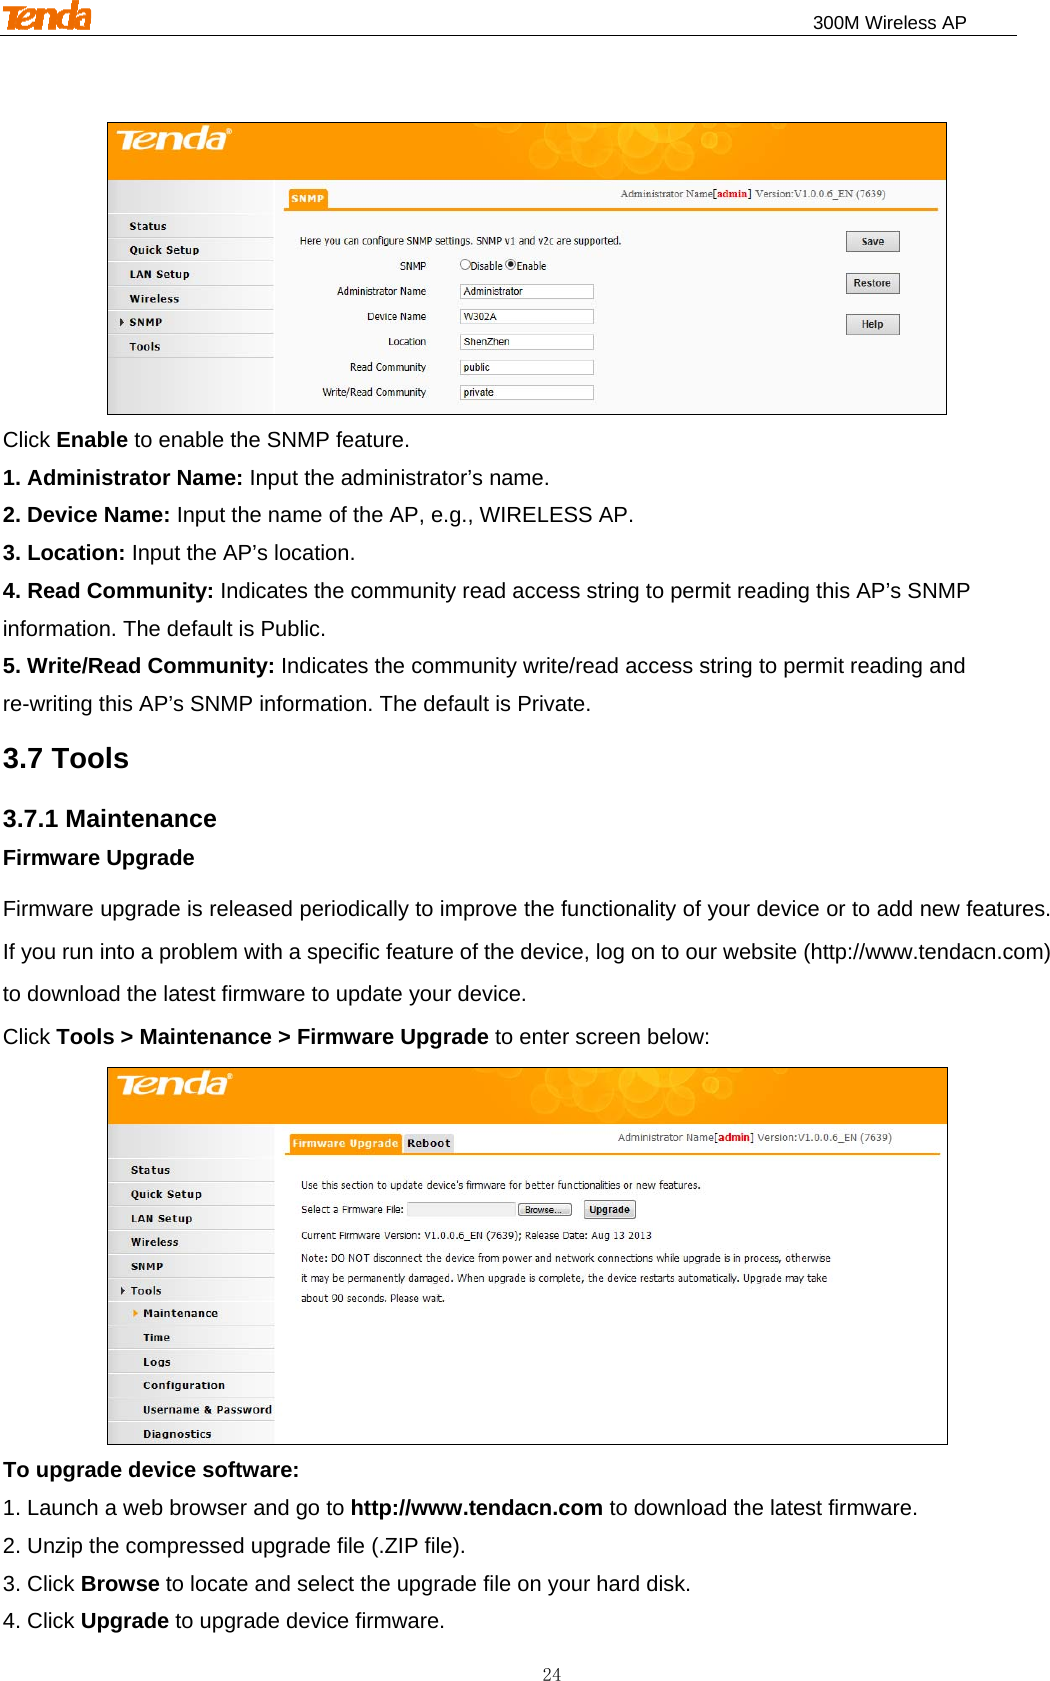                                                                              300M Wireless AP 24  Click Enable to enable the SNMP feature. 1. Administrator Name: Input the administrator’s name. 2. Device Name: Input the name of the AP, e.g., WIRELESS AP. 3. Location: Input the AP’s location. 4. Read Community: Indicates the community read access string to permit reading this AP’s SNMP information. The default is Public. 5. Write/Read Community: Indicates the community write/read access string to permit reading and re-writing this AP’s SNMP information. The default is Private. 3.7 Tools 3.7.1 Maintenance Firmware Upgrade Firmware upgrade is released periodically to improve the functionality of your device or to add new features. If you run into a problem with a specific feature of the device, log on to our website (http://www.tendacn.com) to download the latest firmware to update your device. Click Tools &gt; Maintenance &gt; Firmware Upgrade to enter screen below:  To upgrade device software: 1. Launch a web browser and go to http://www.tendacn.com to download the latest firmware. 2. Unzip the compressed upgrade file (.ZIP file). 3. Click Browse to locate and select the upgrade file on your hard disk. 4. Click Upgrade to upgrade device firmware. 